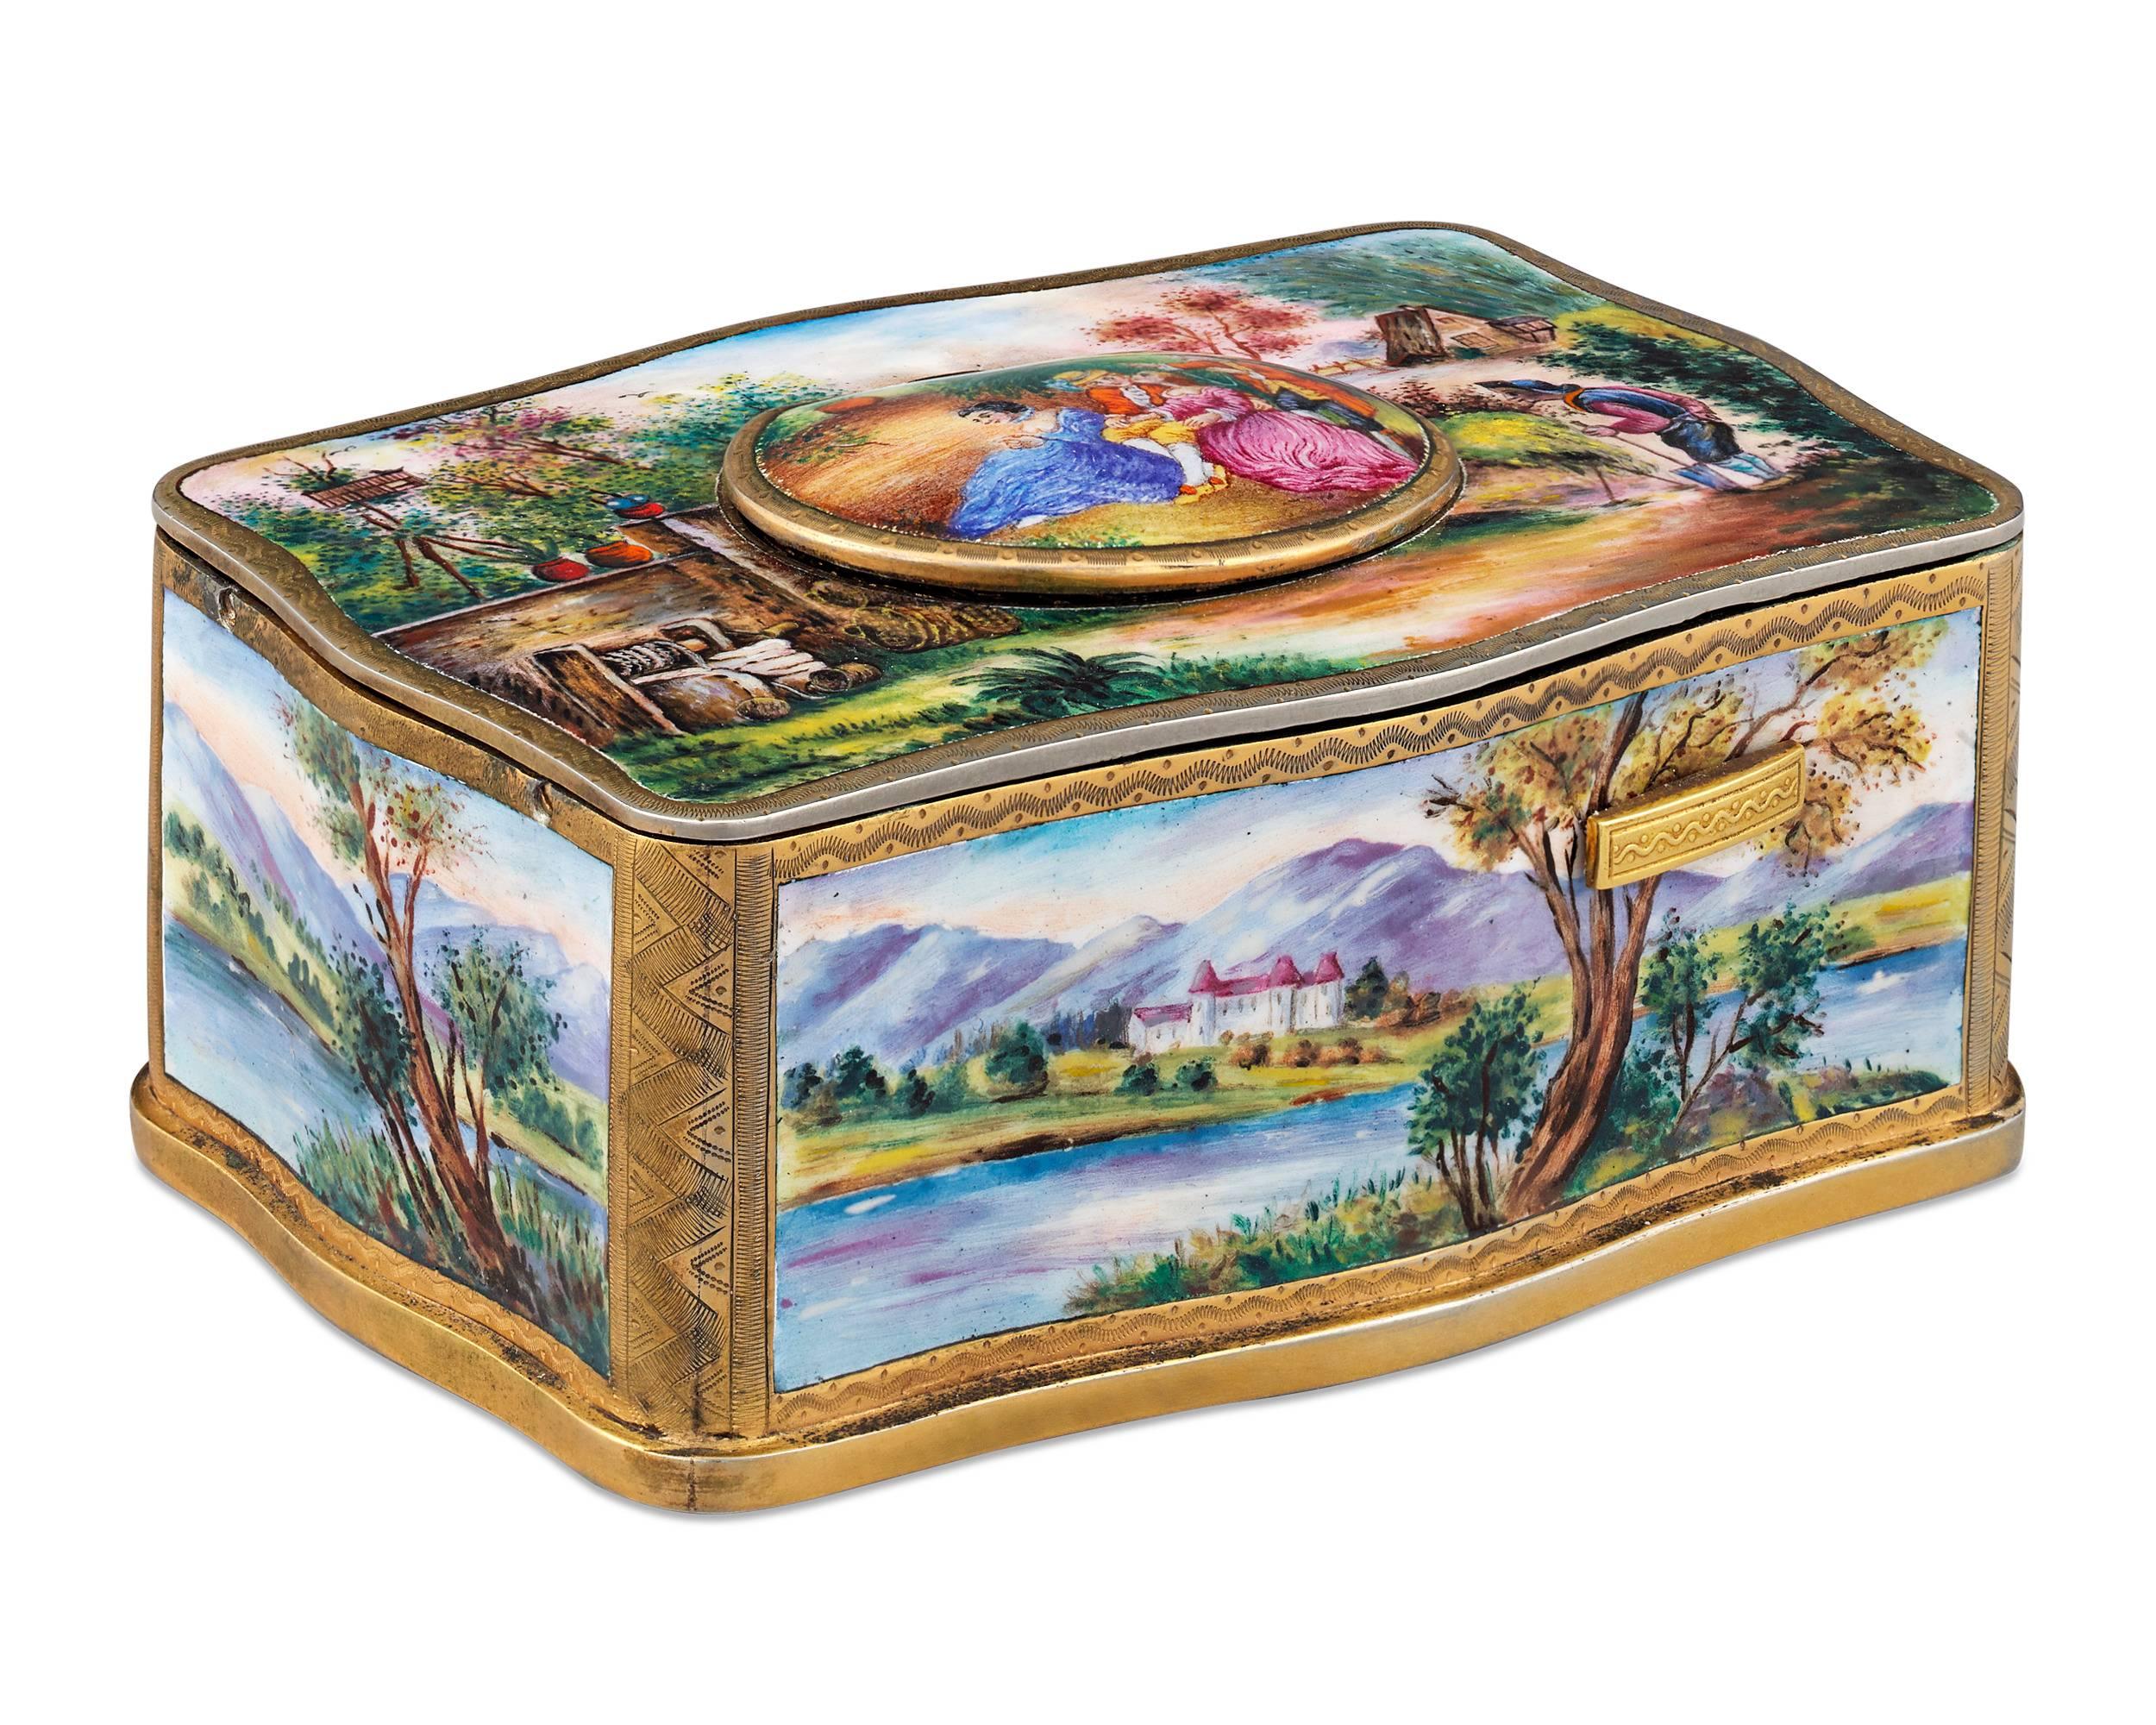 The mechanism of this enchanting German singing bird box is attributed to the renowned Karl Griesbaum. Hand-painted enamel by Emil Brenk adorns the entire case, featuring exquisitely executed romantic and pastoral scenes. Concealed inside the box is